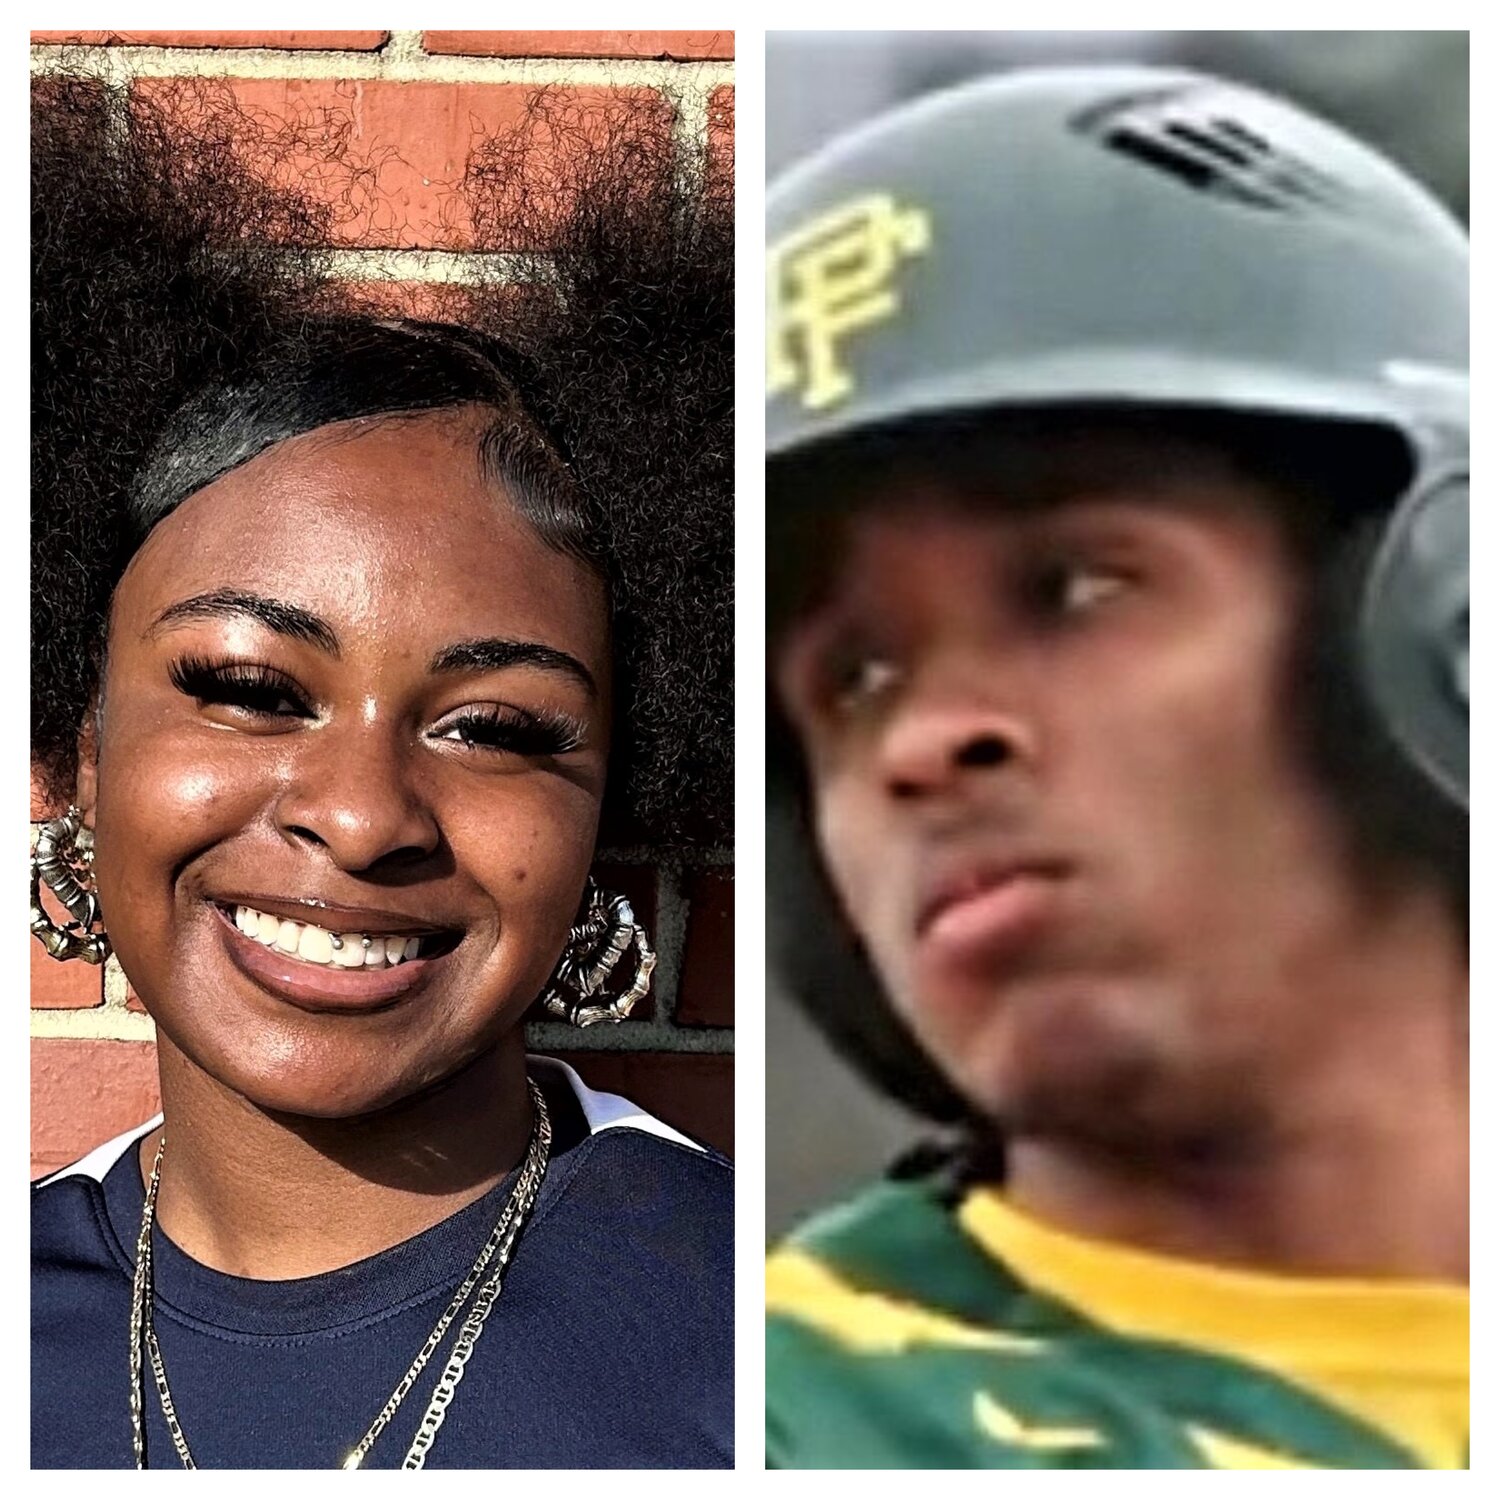 The Cumberland County high school Athletes of the Week are  Ziera Mitchell, E.E. Smith soccer, and Isaiah Pinero, Pine Forest baseball.